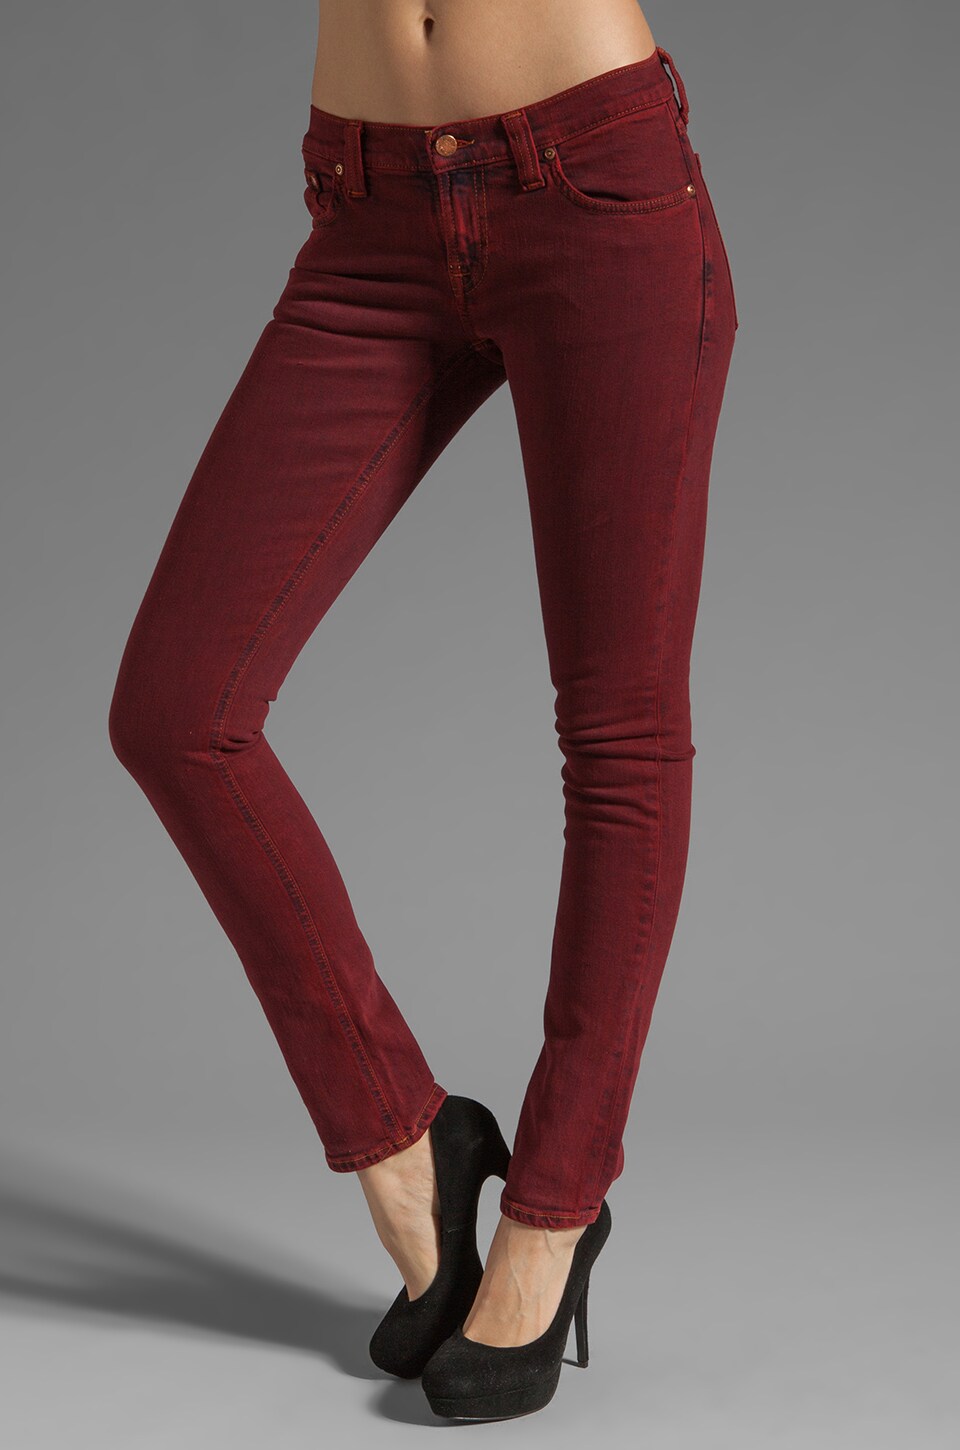 tight red jeans